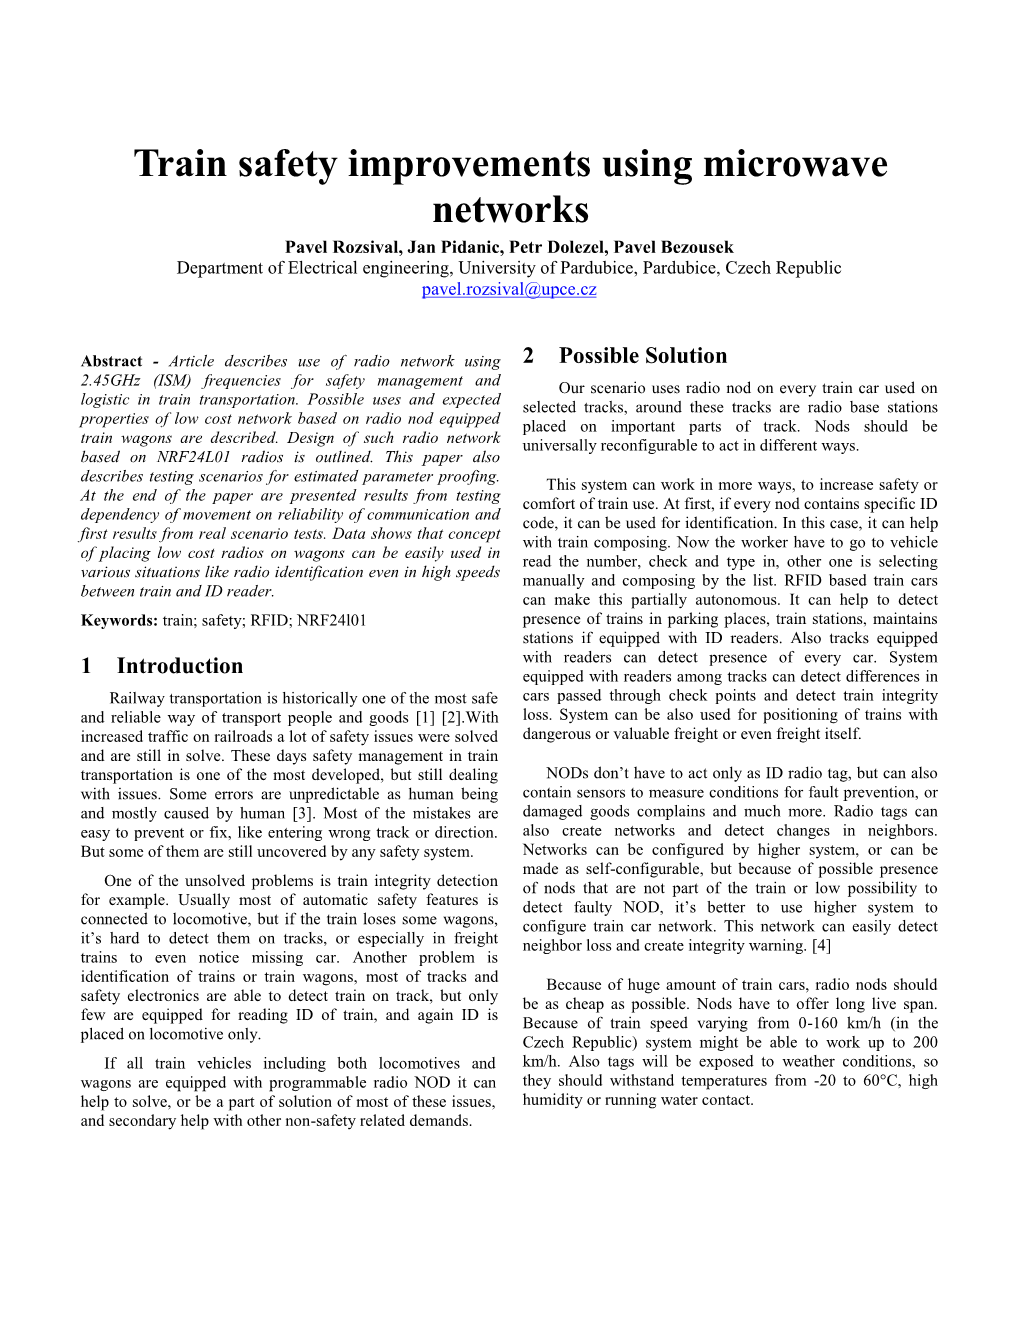 Train Safety Improvements Using Microwave Networks